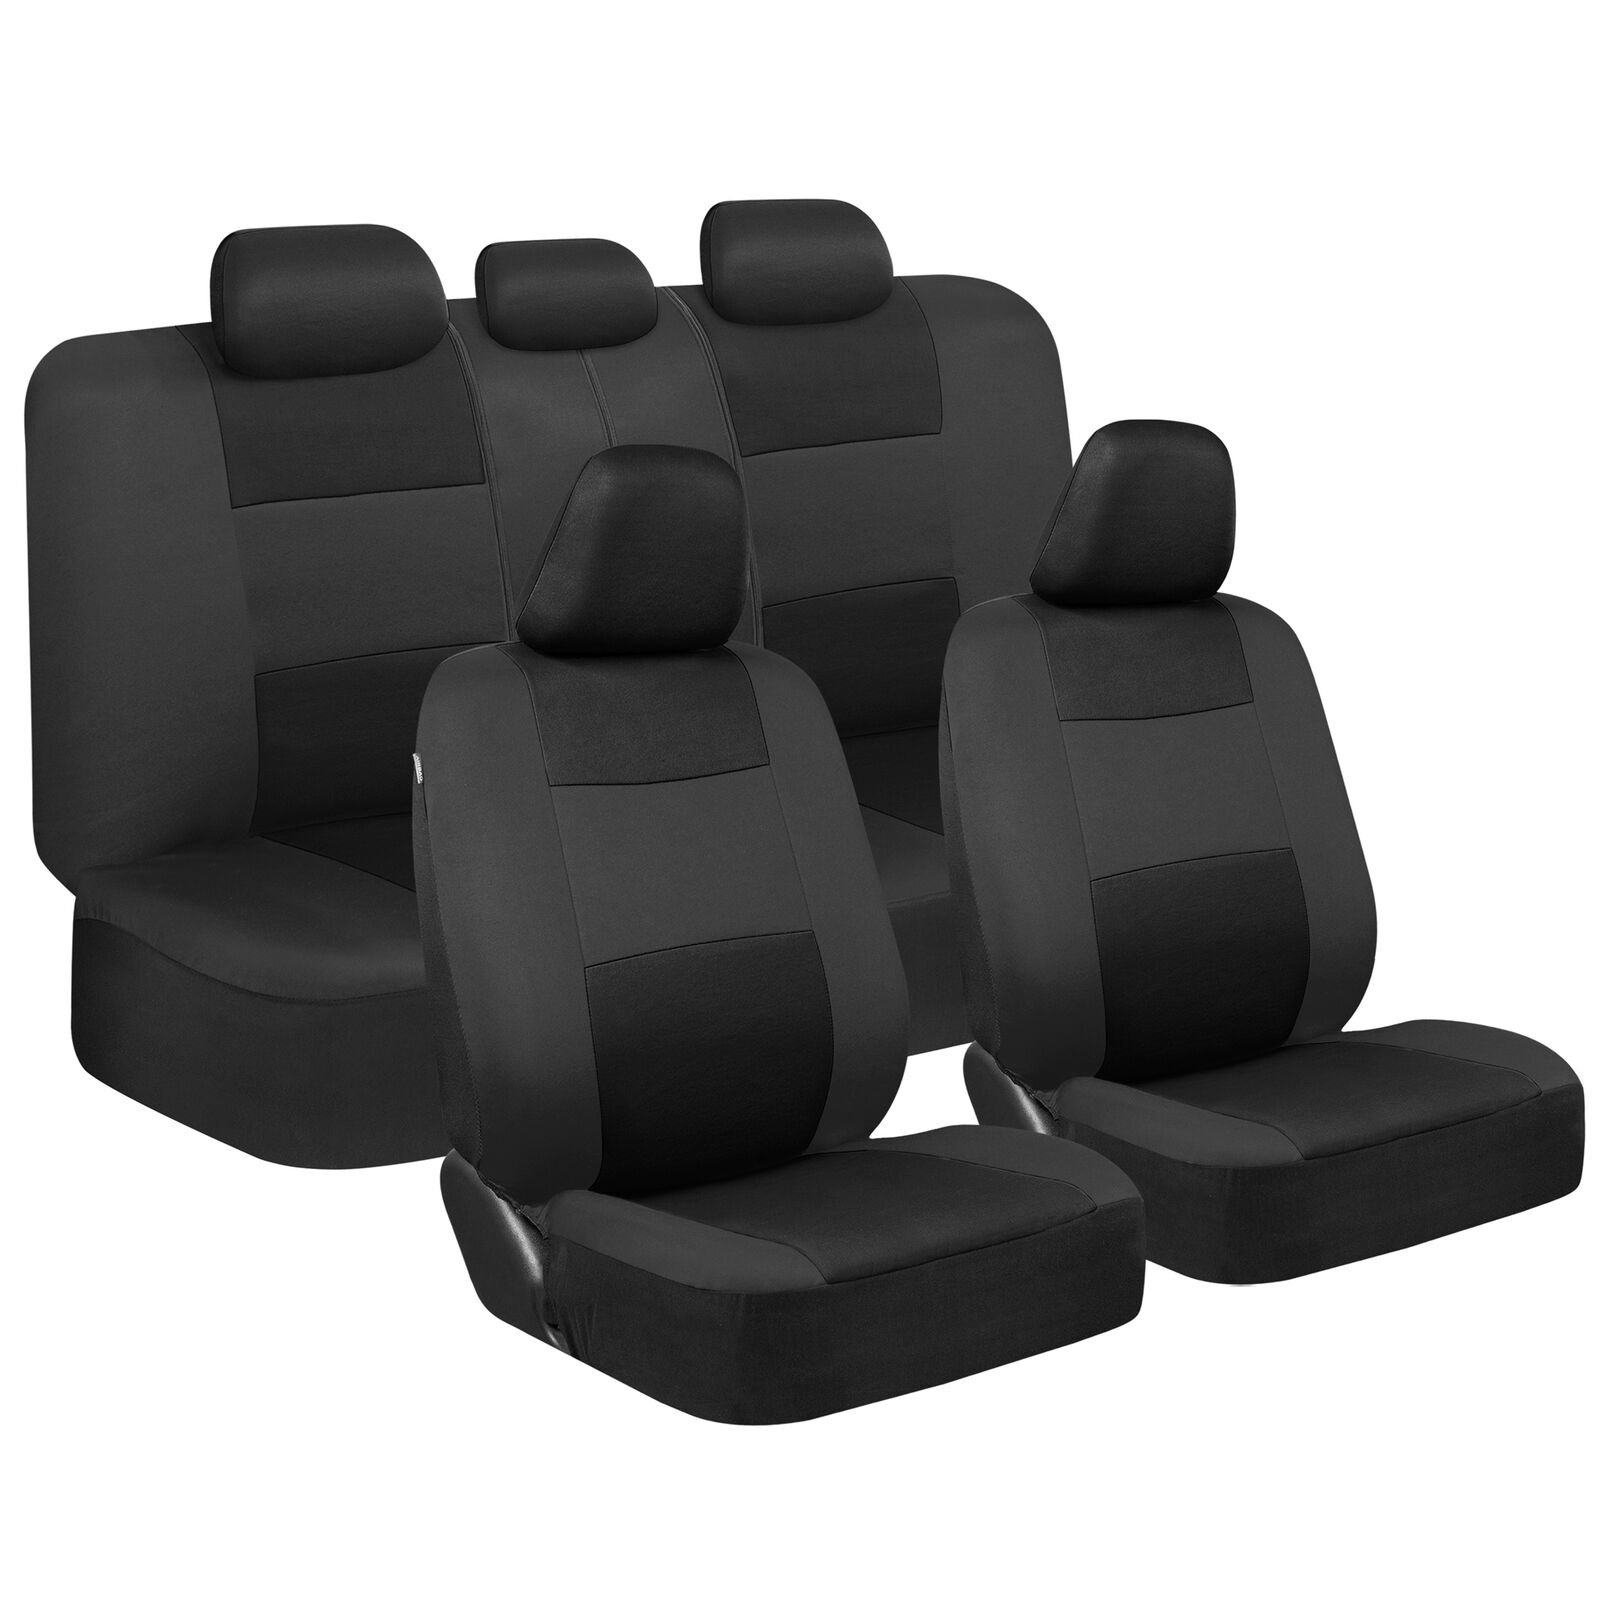 Black Gray Car Seat Covers Full Set Front and Rear Bench for Auto Truck SUV